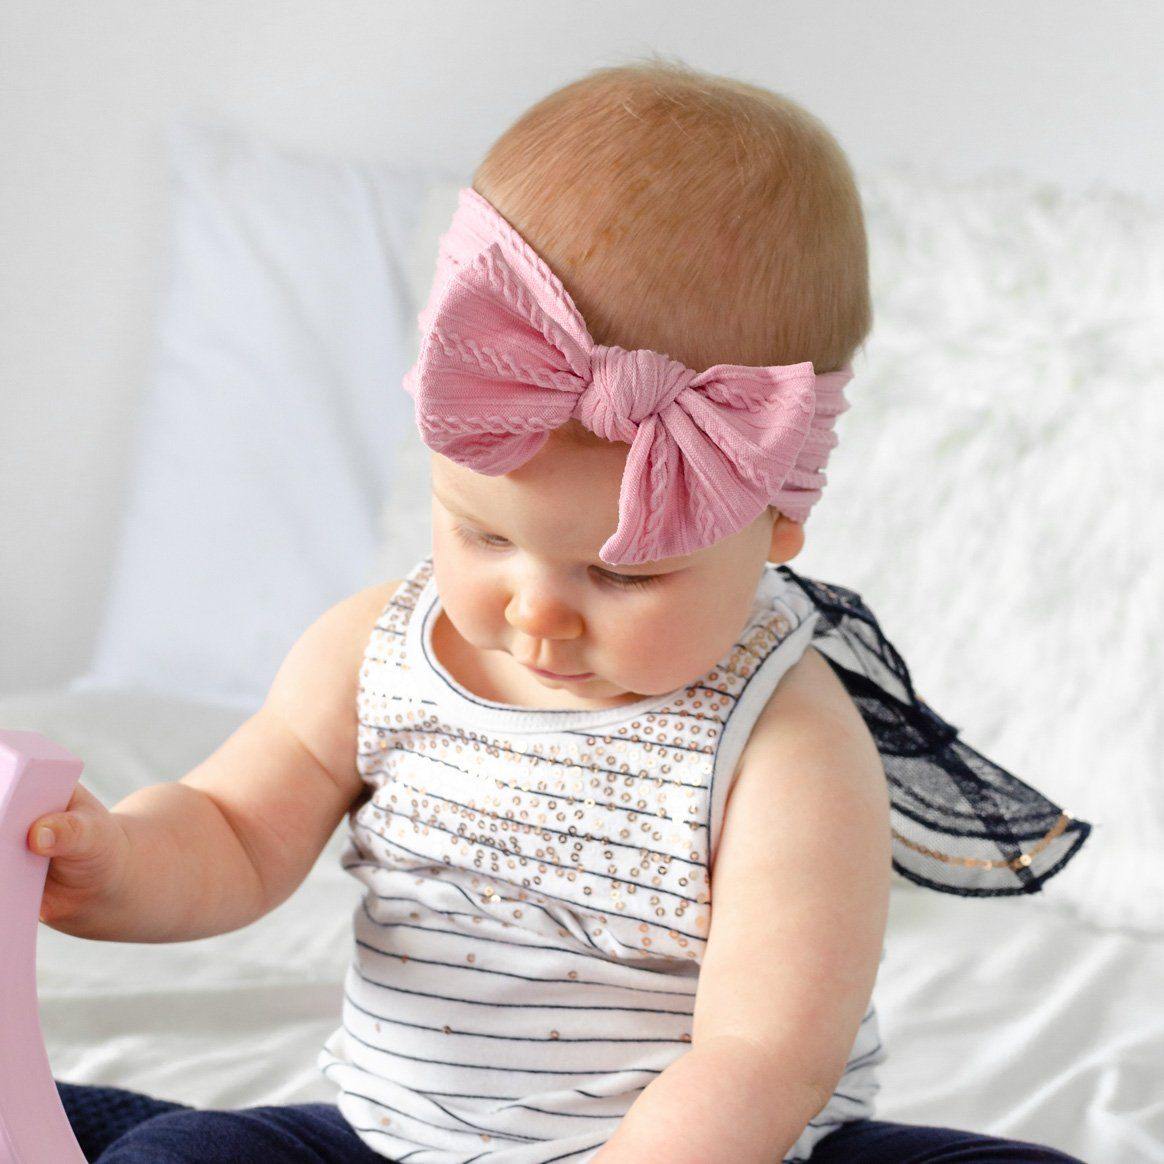 Cable Bow Headband - Dusty Pink - 